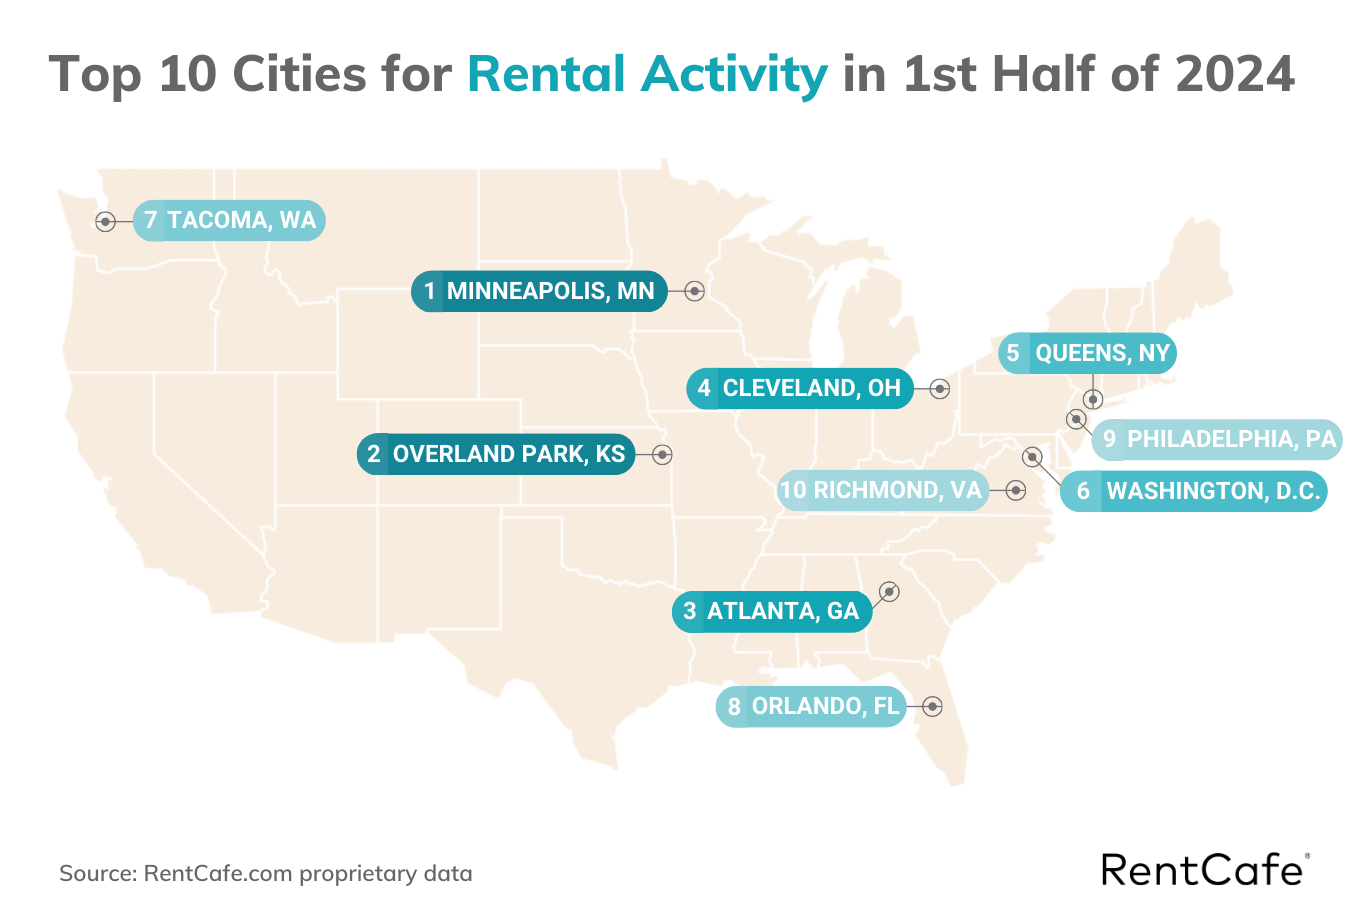 Top 10 cities for rental activity in the first half of 2024